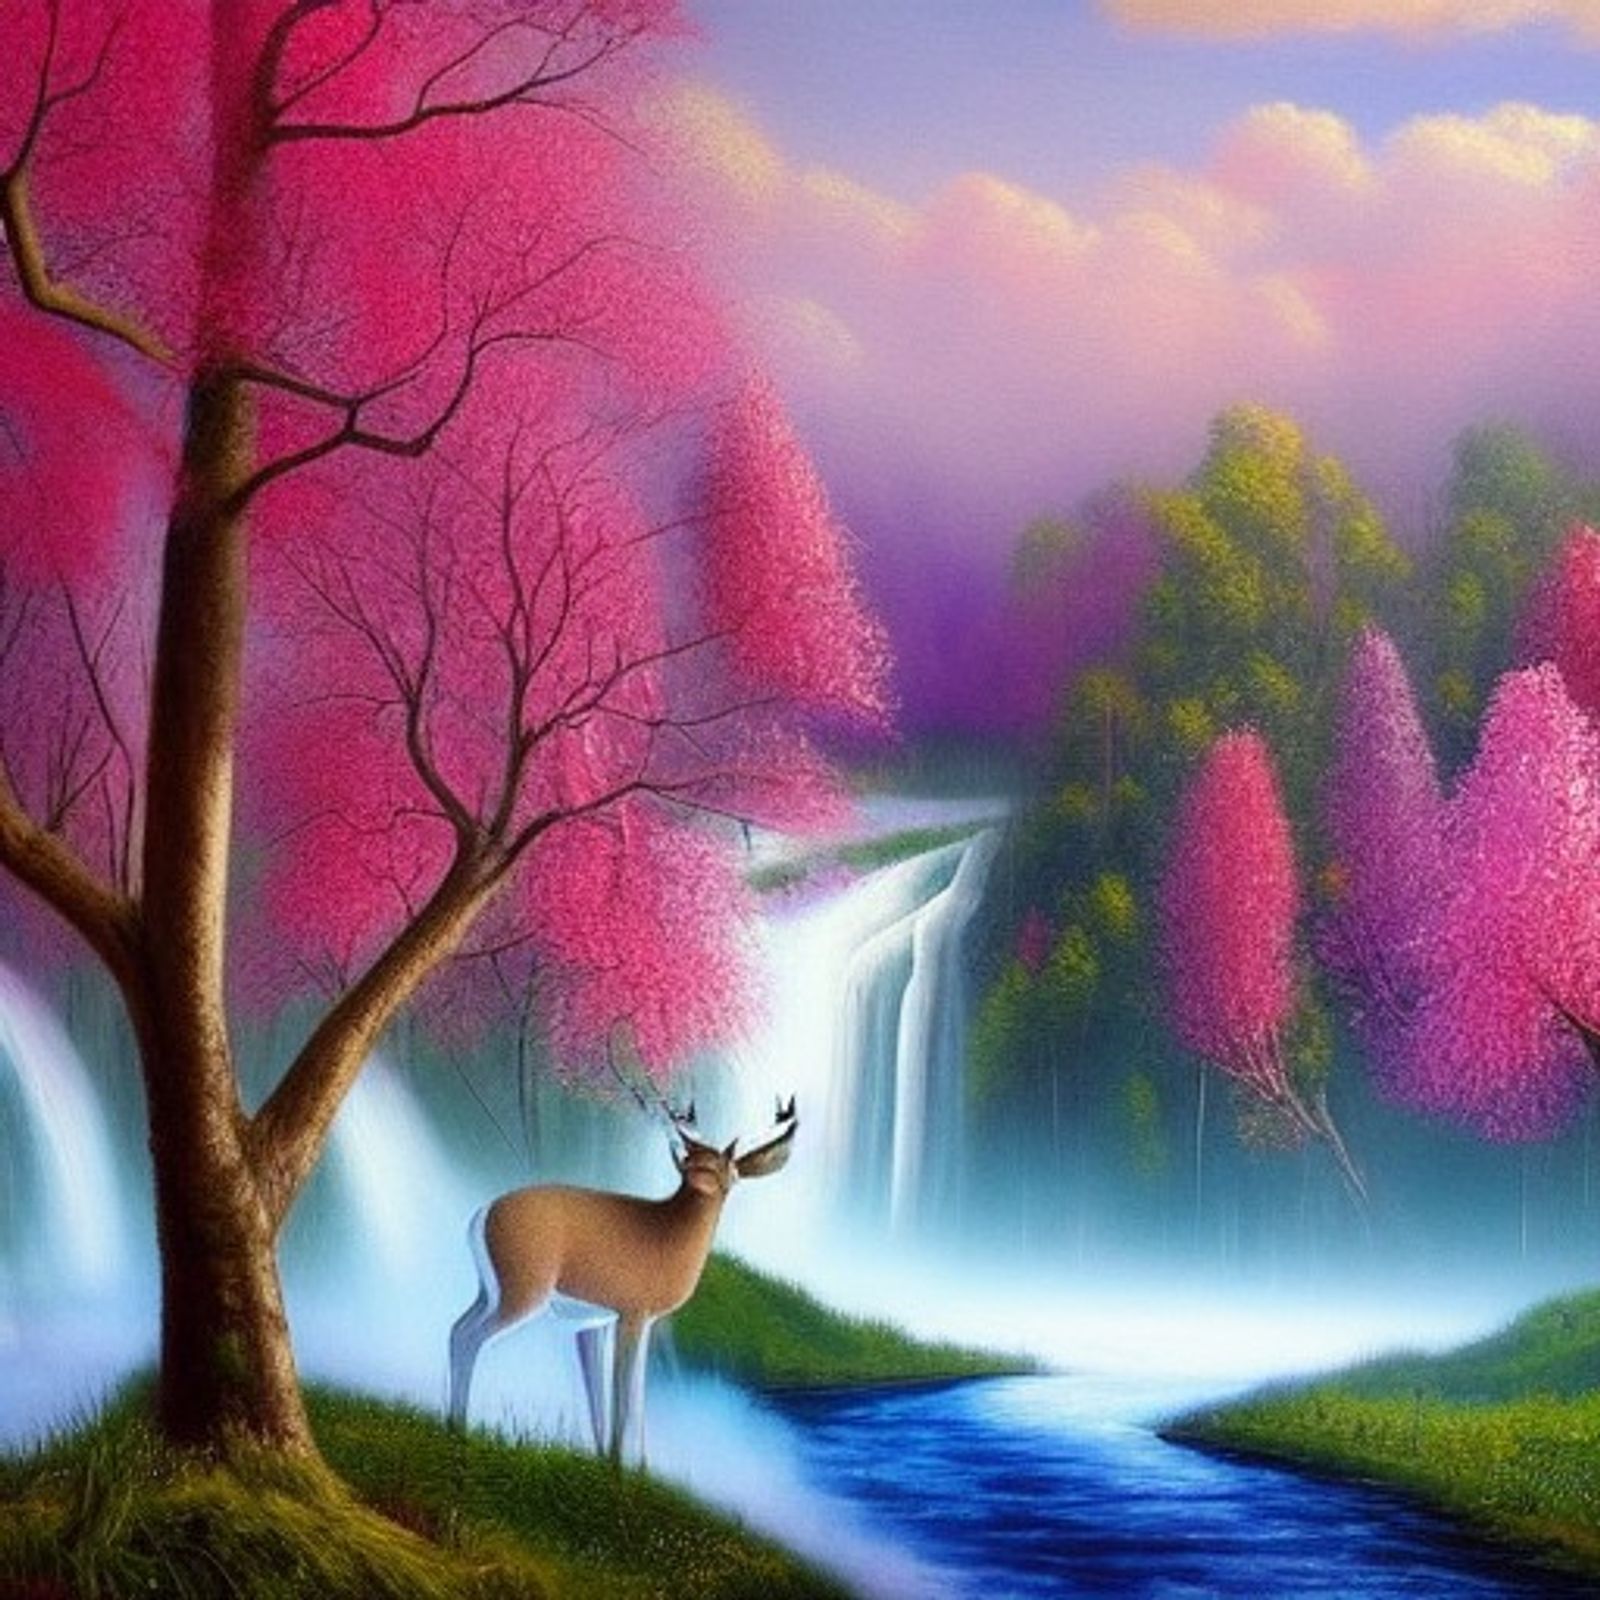 most beautiful scenery paintings